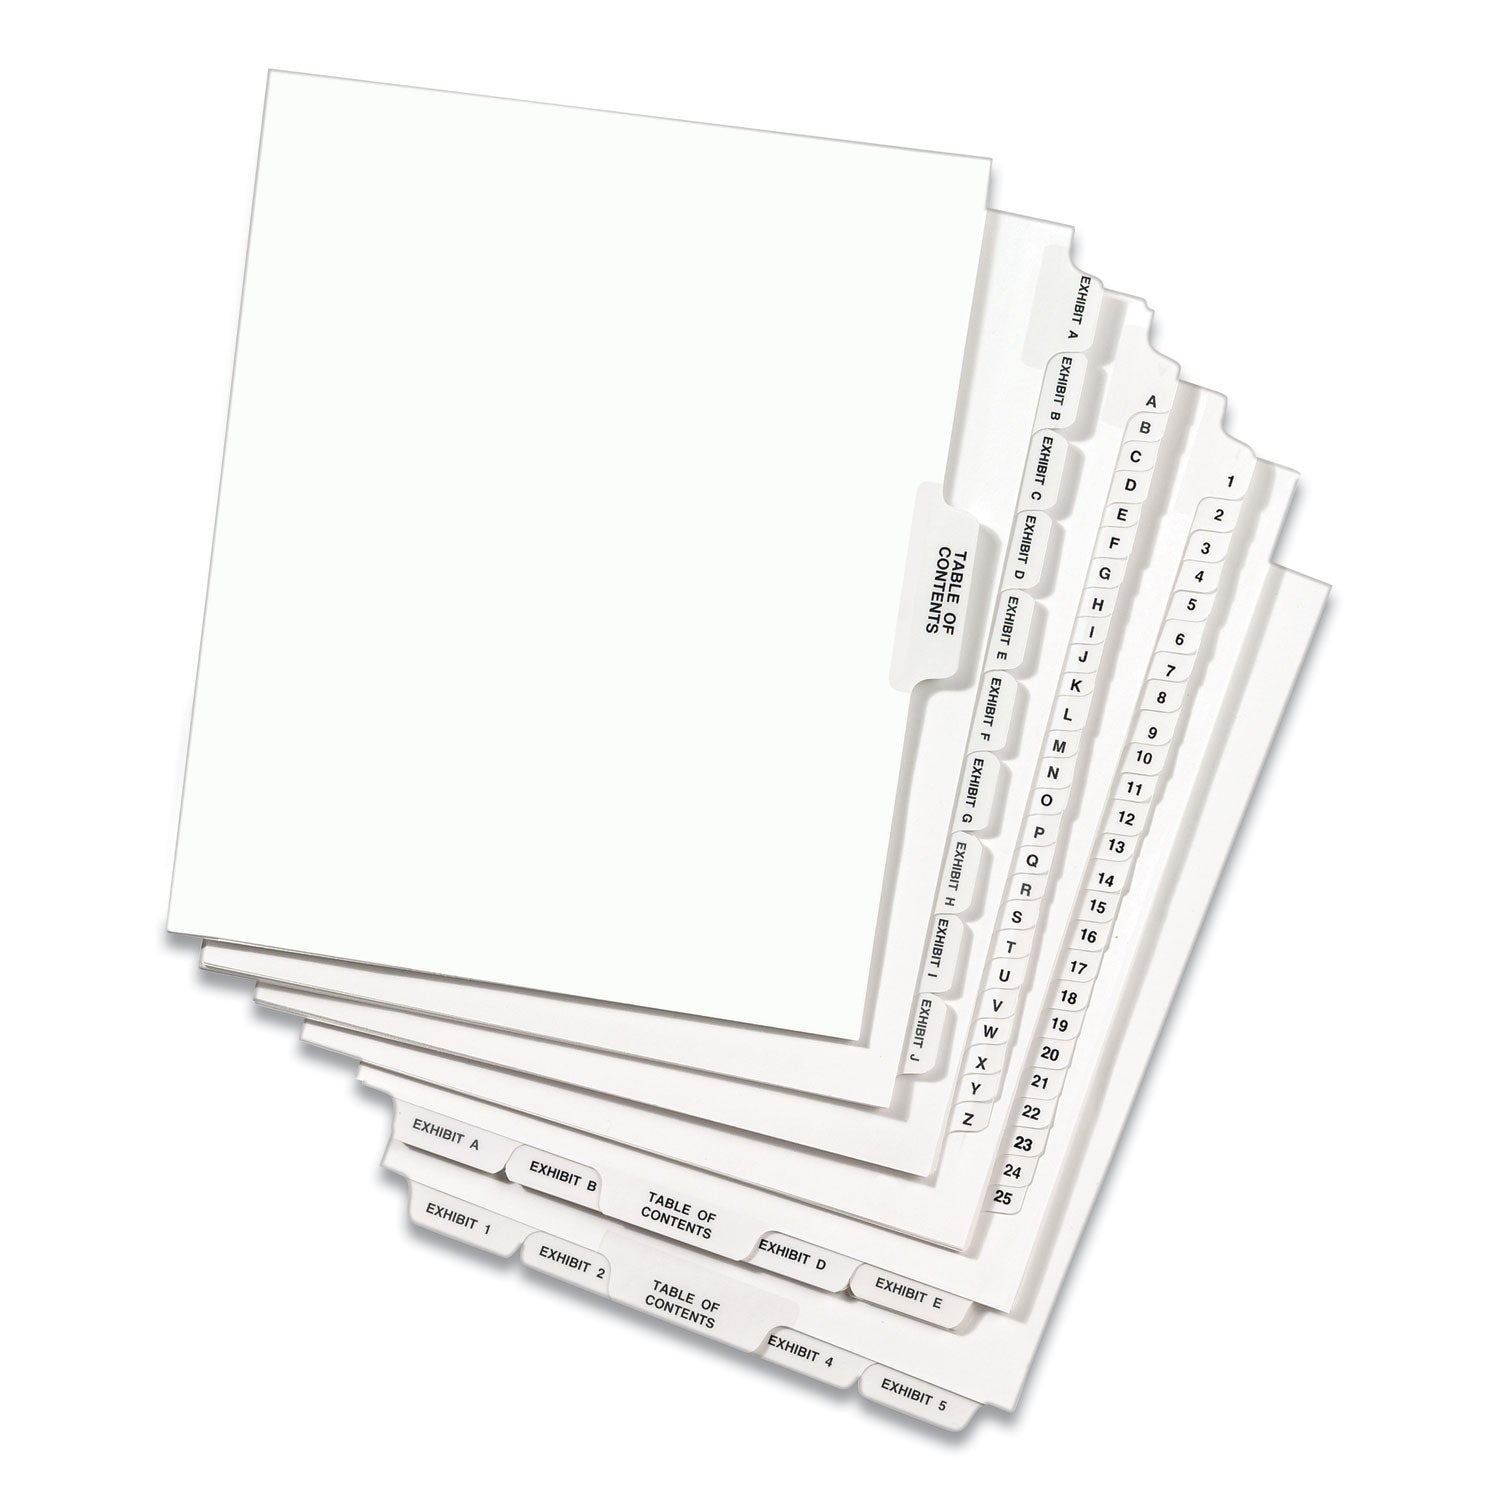 Preprinted Legal Exhibit Side Tab Index Dividers, Avery Style, 26-Tab, 51 to 75, 11 x 8.5, White, 1 Set - 